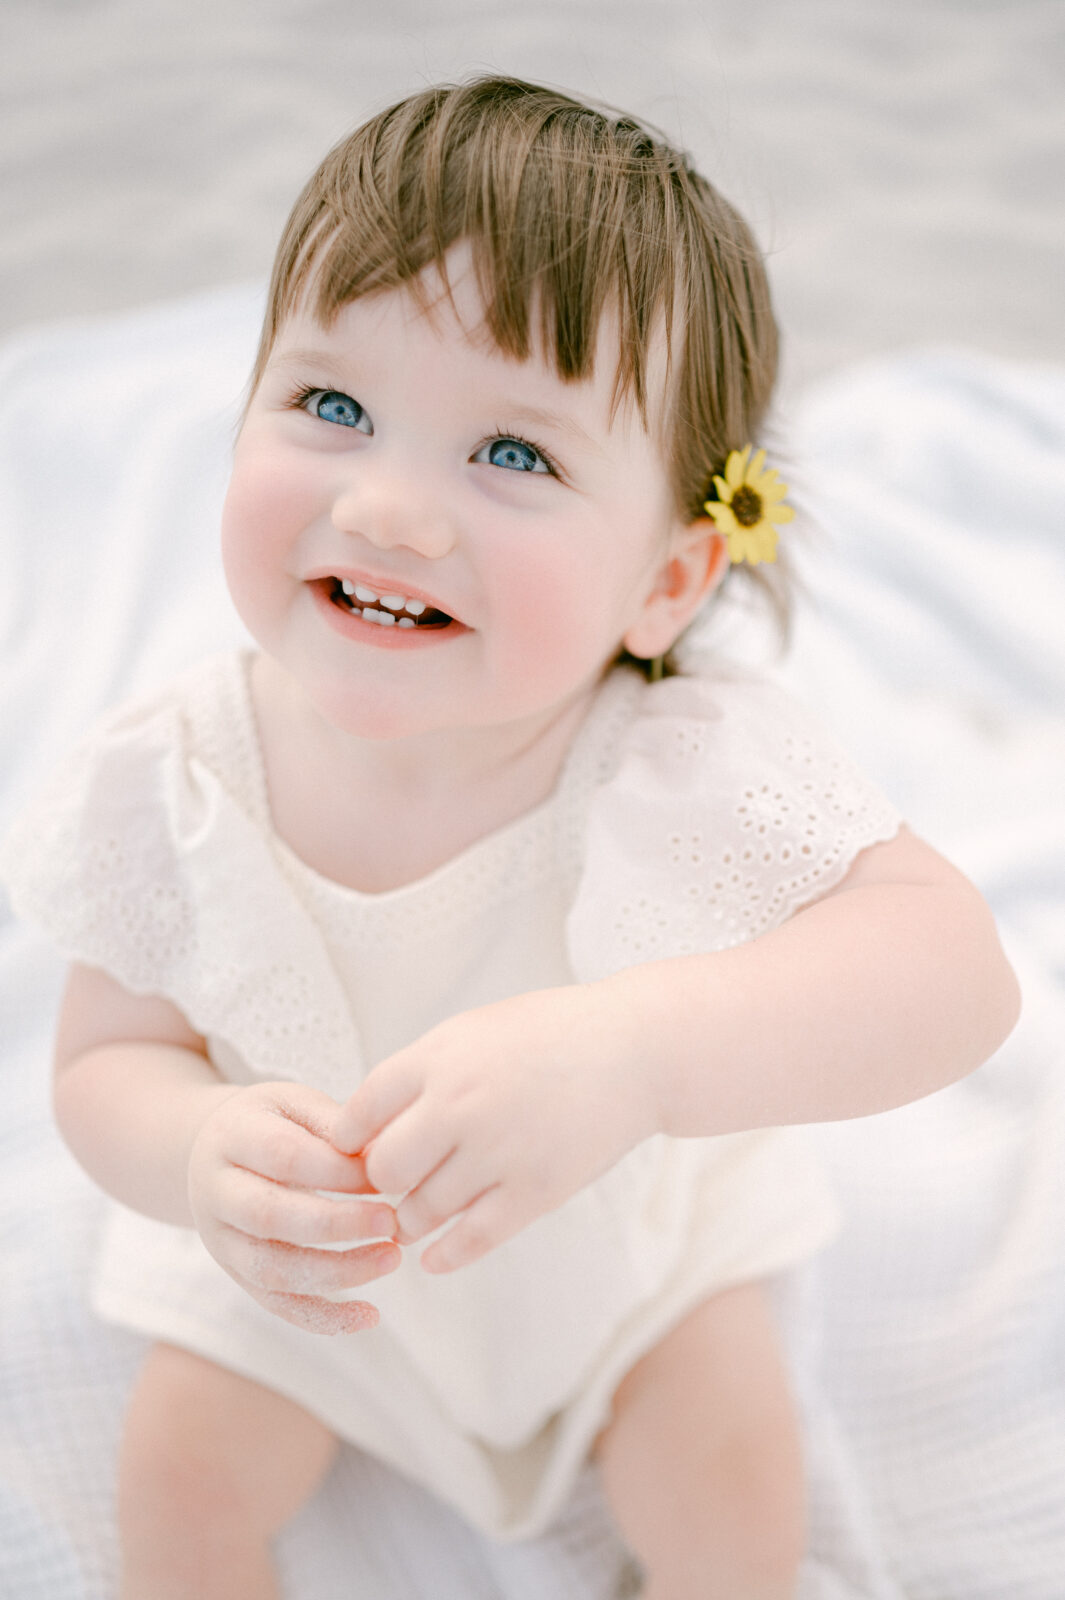 Blue eyed little girl smiling with a yellow flower on her ear